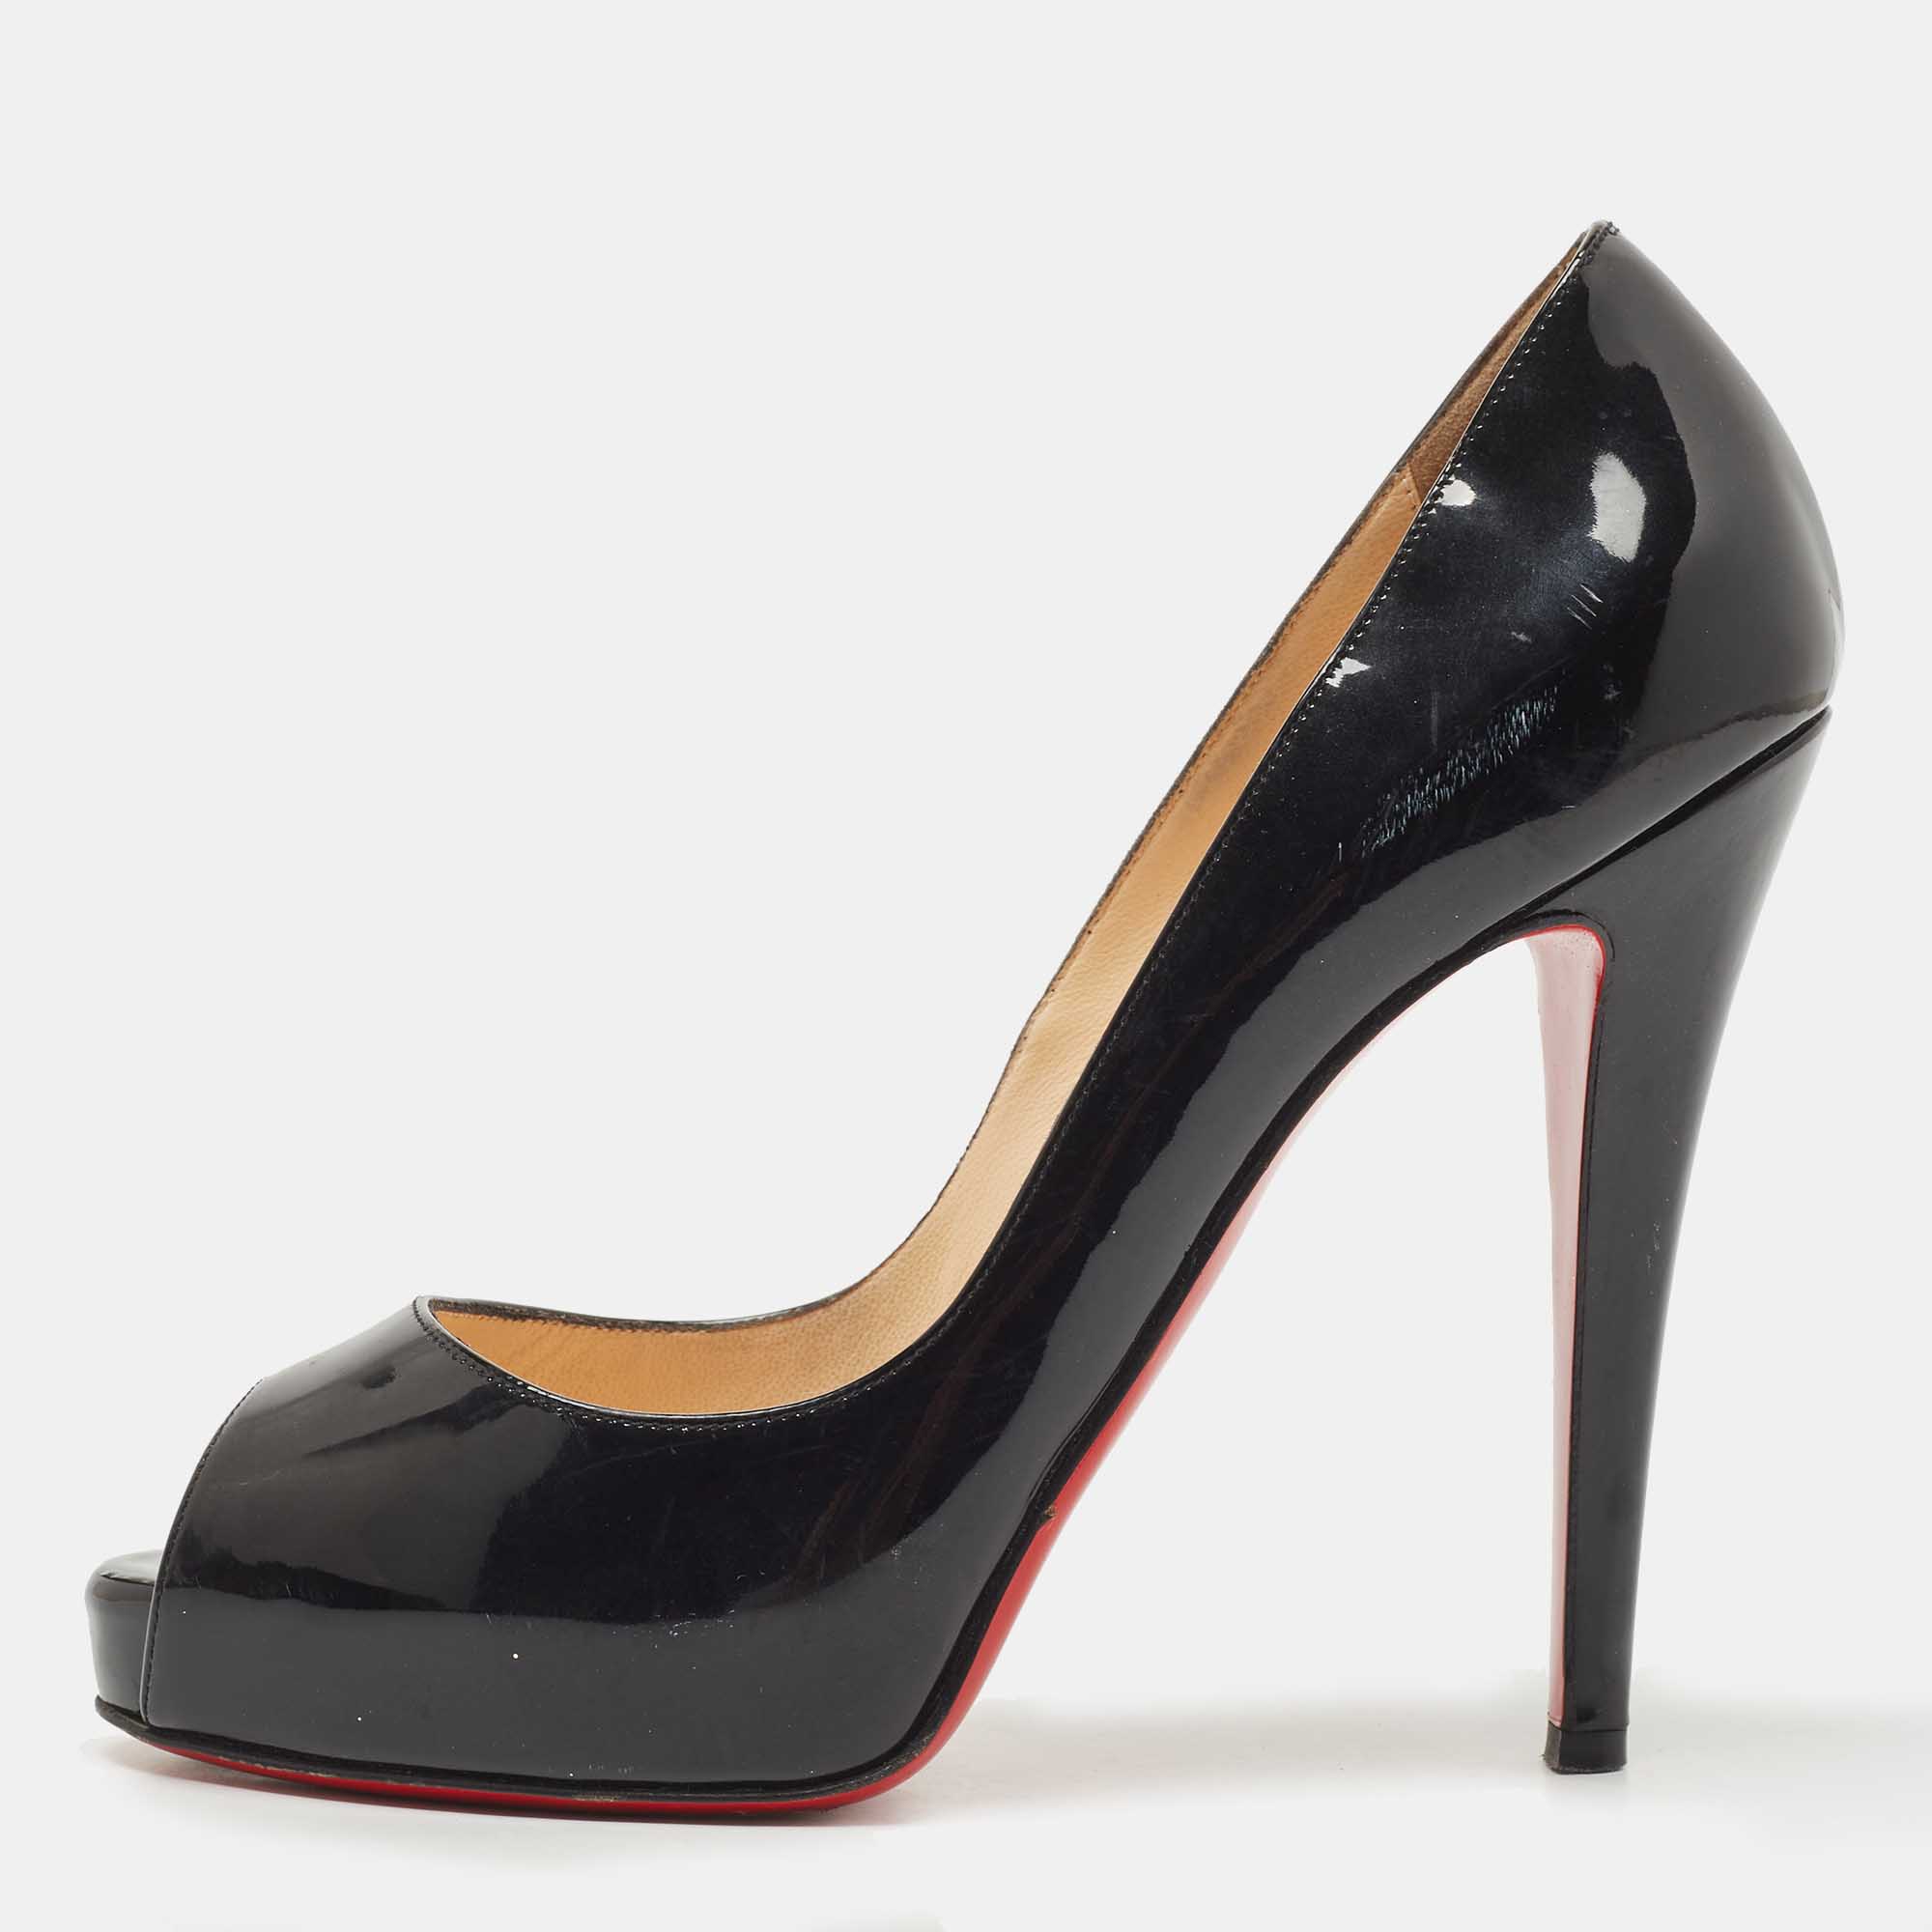 Pre-owned Christian Louboutin Black Patent Very Prive Pumps Size 38